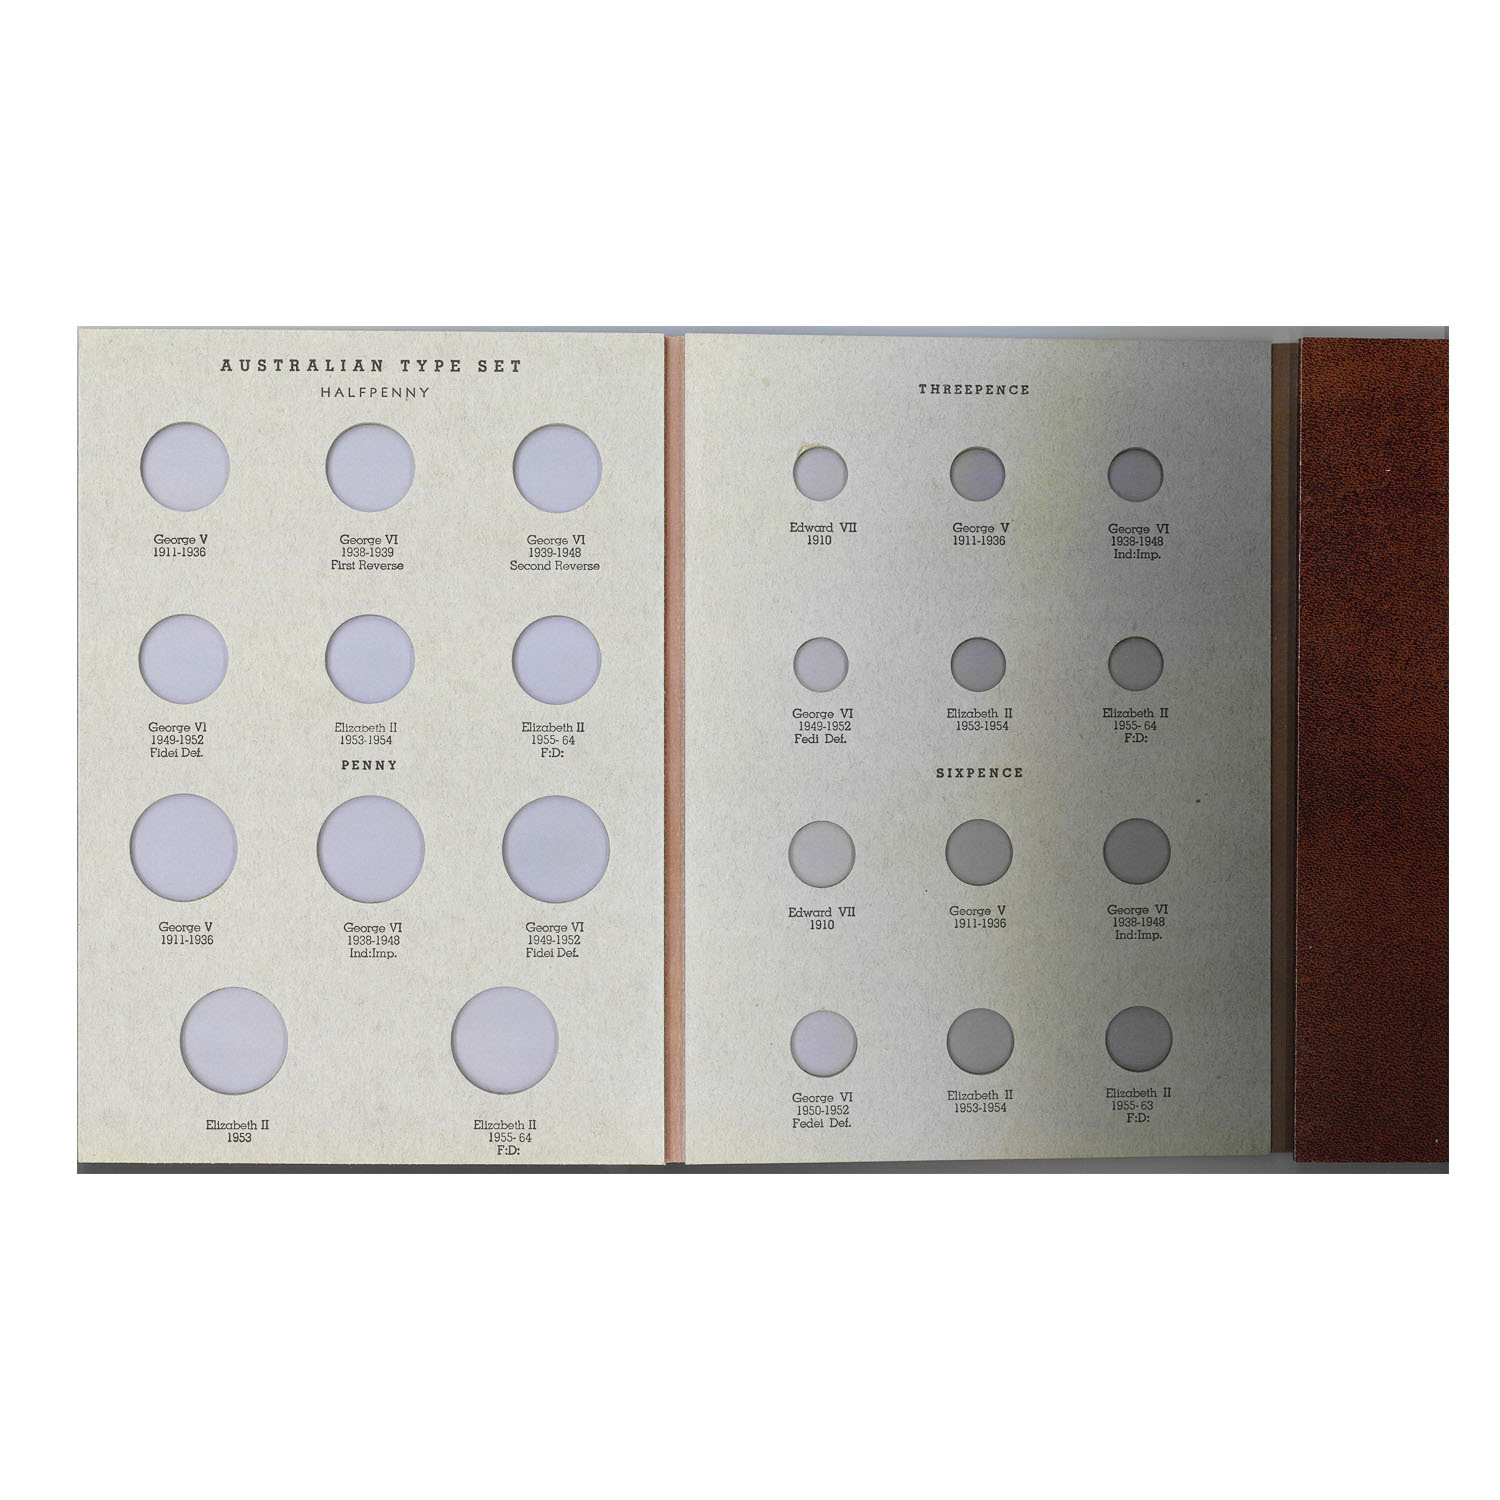 Dansco deluxe coin folders and supreme albums for Australian coins